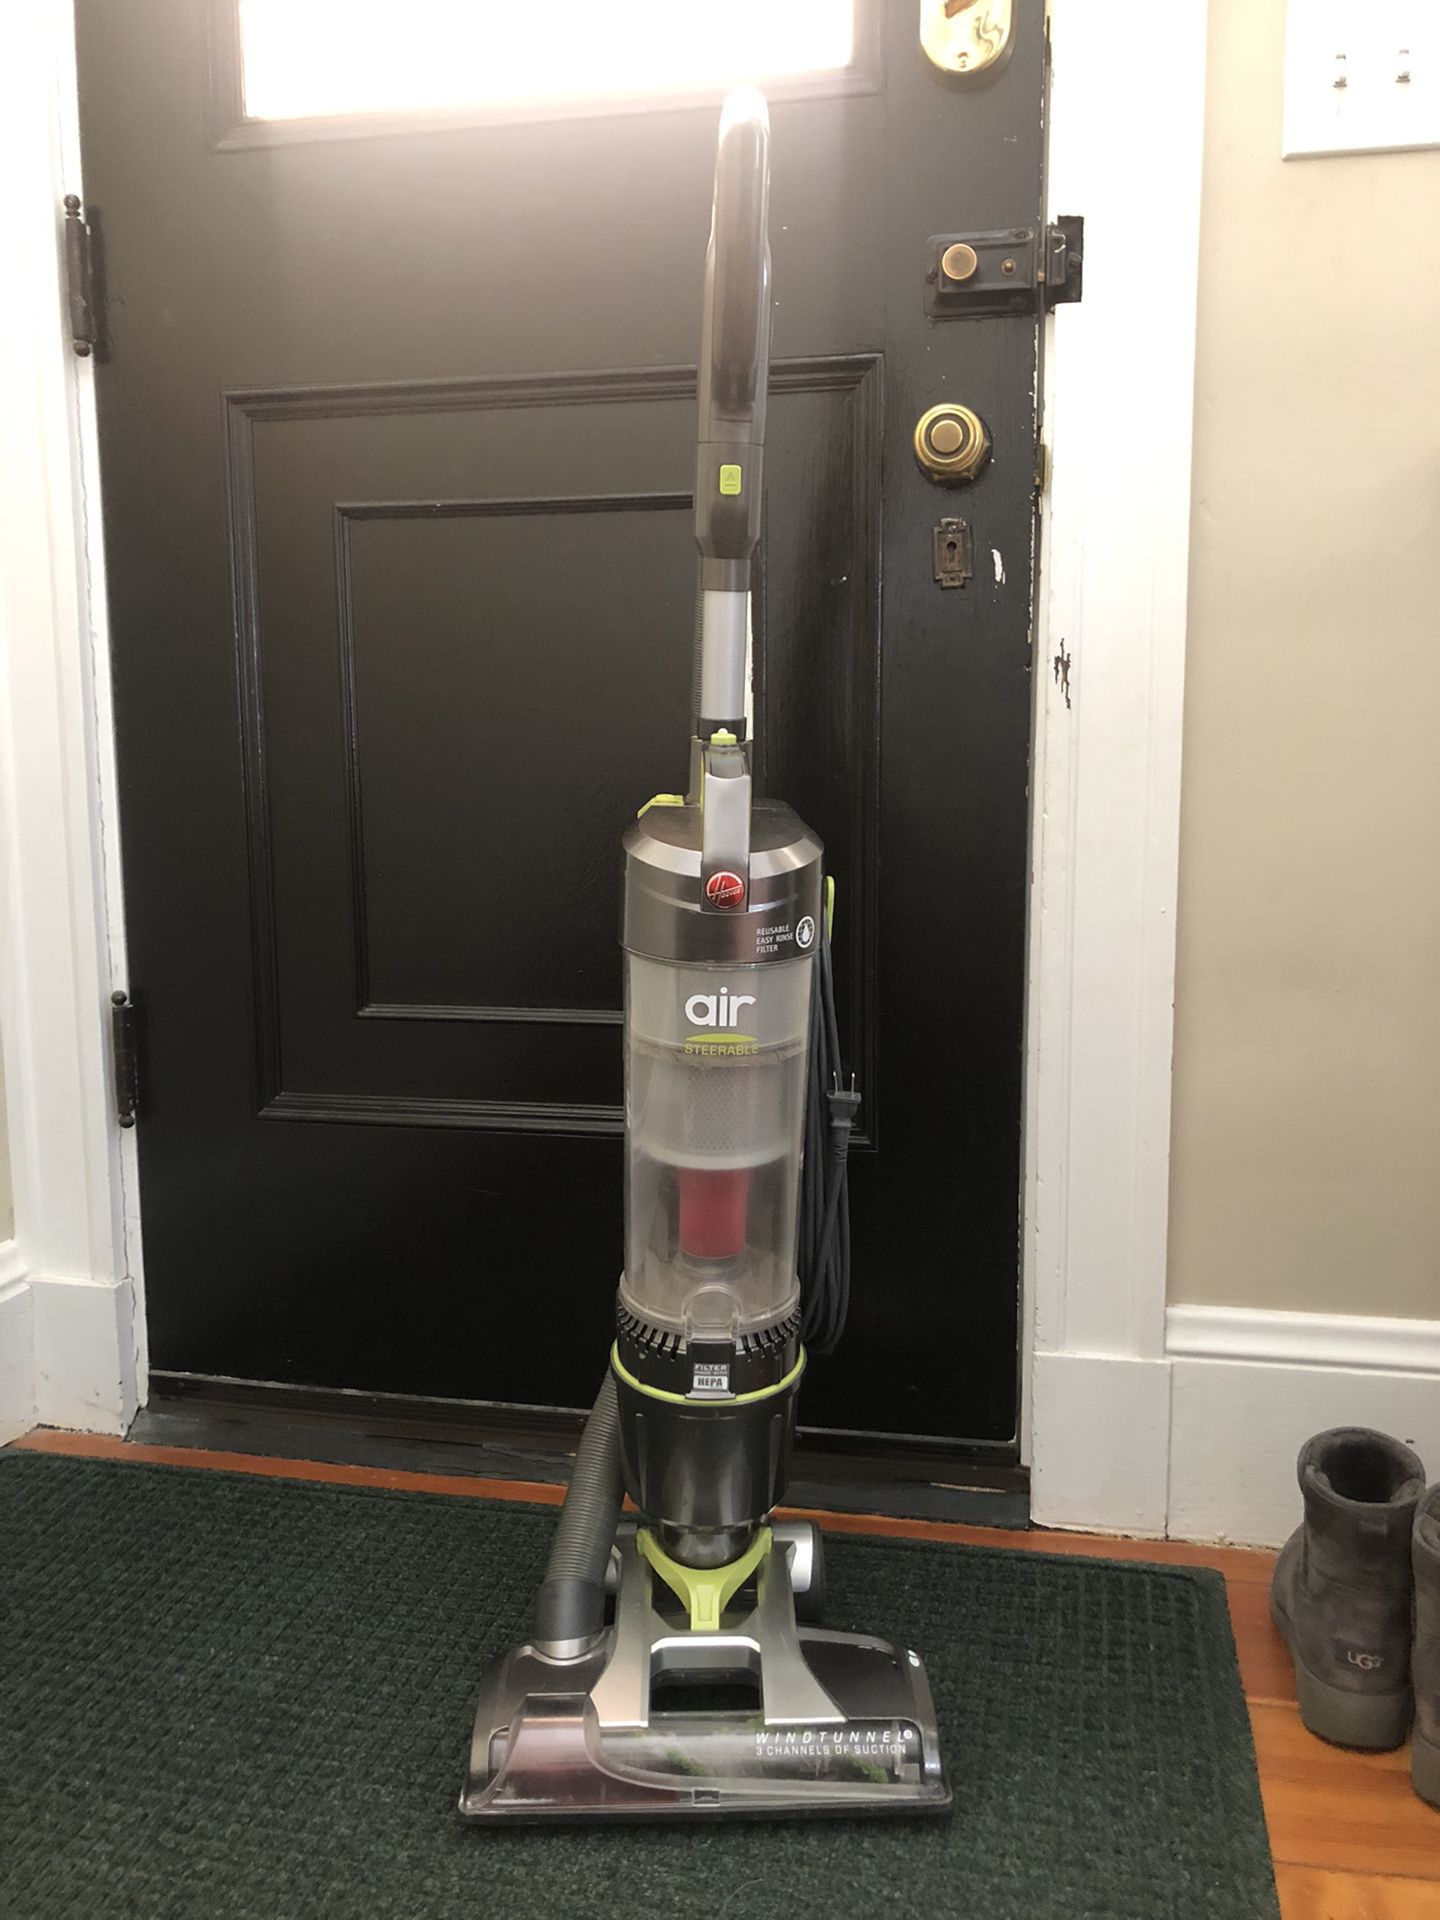 Hoover wind tunnel vacuum cleaner